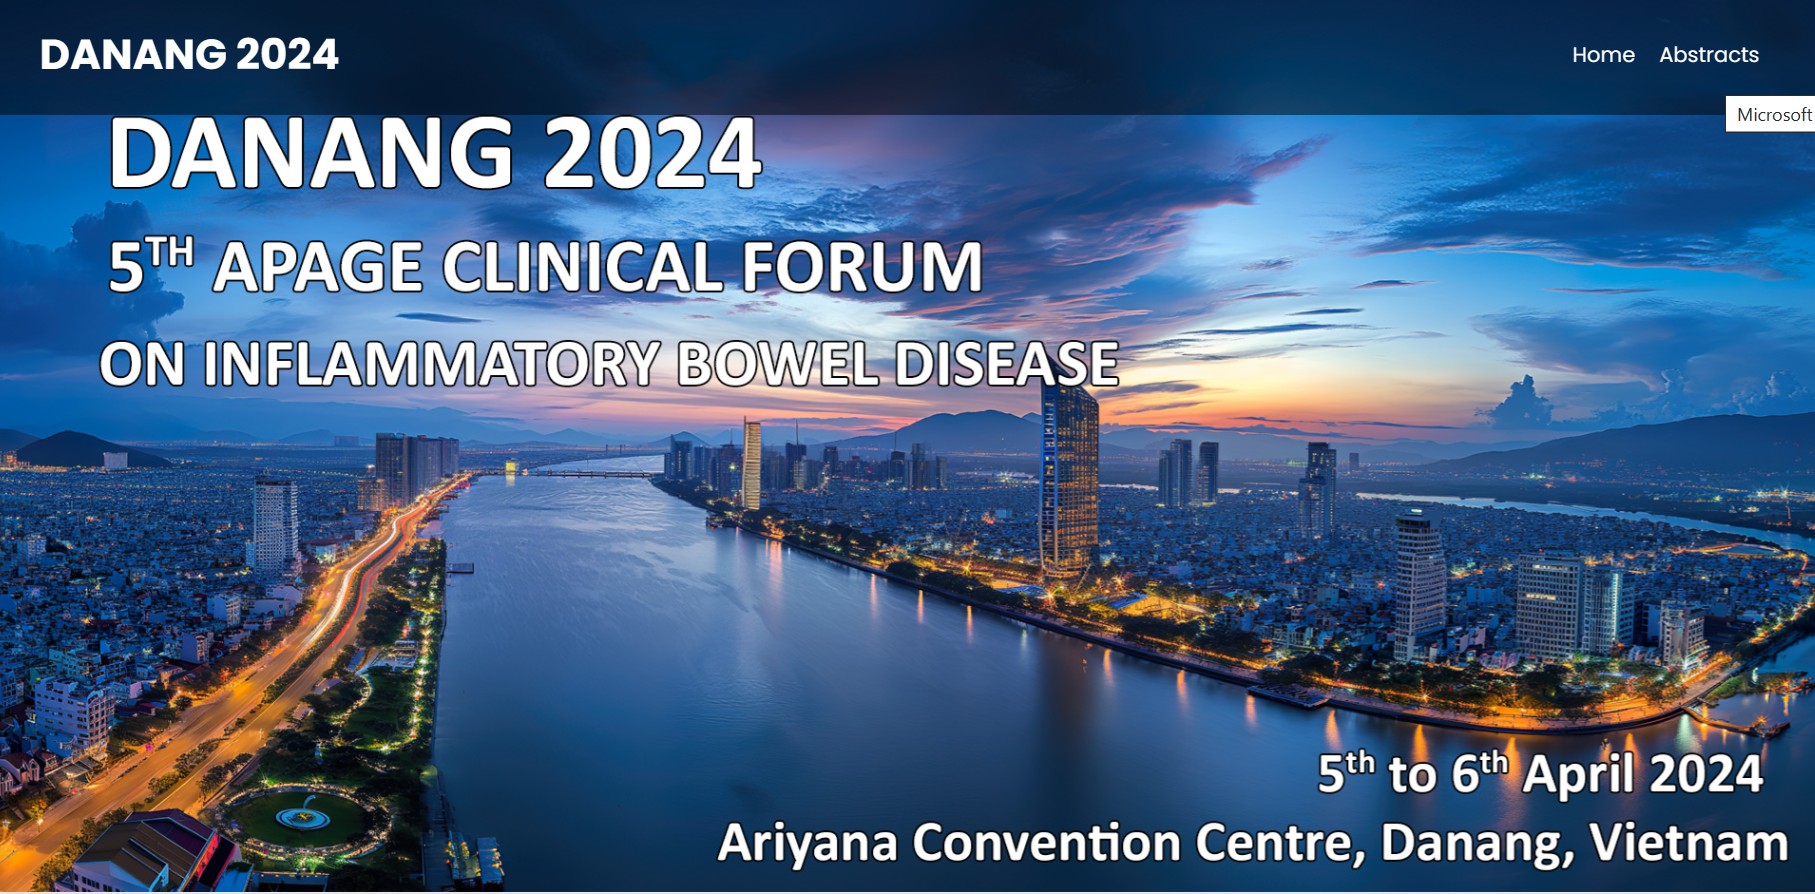 DANANG 2024 – 5th APAGE Clinical Forum on Inflammatory Bowel Disease - 5th to 6th April 2024